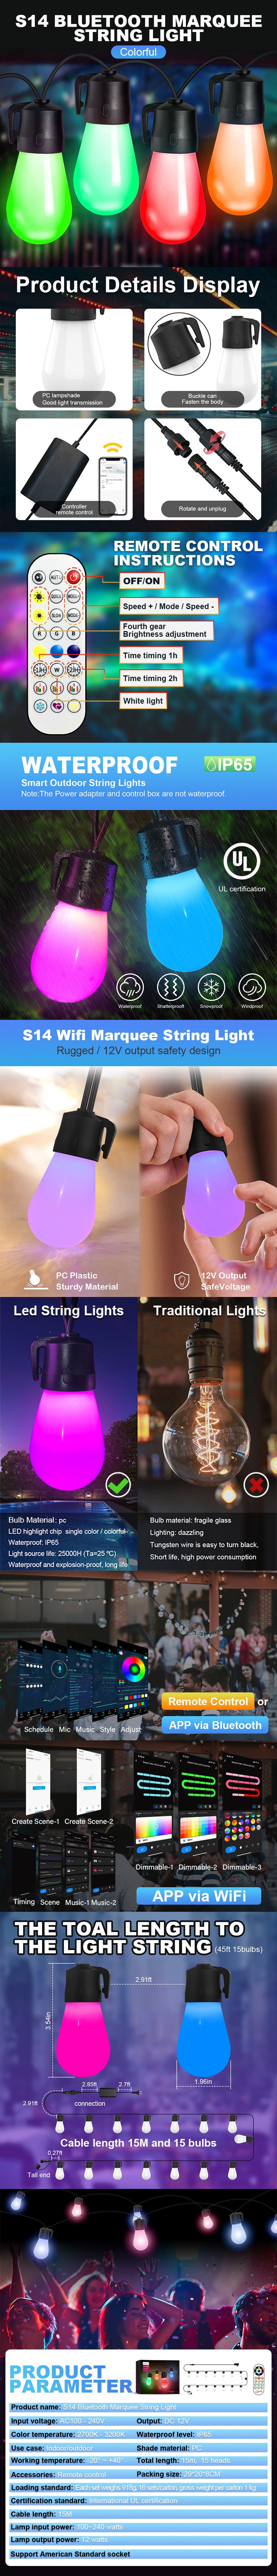 ShiningShow-Smart-String-Lights,15m-Colored-Patio-Lights-Works-By-Bluetooth-or-wifi,-15-Shatterproof-RGBW-Bulbs,-Waterproof-Hanging-Lights-for-Outdoor-Patio,-Backyard,-Porch,-Deck,-Pool,-Party5